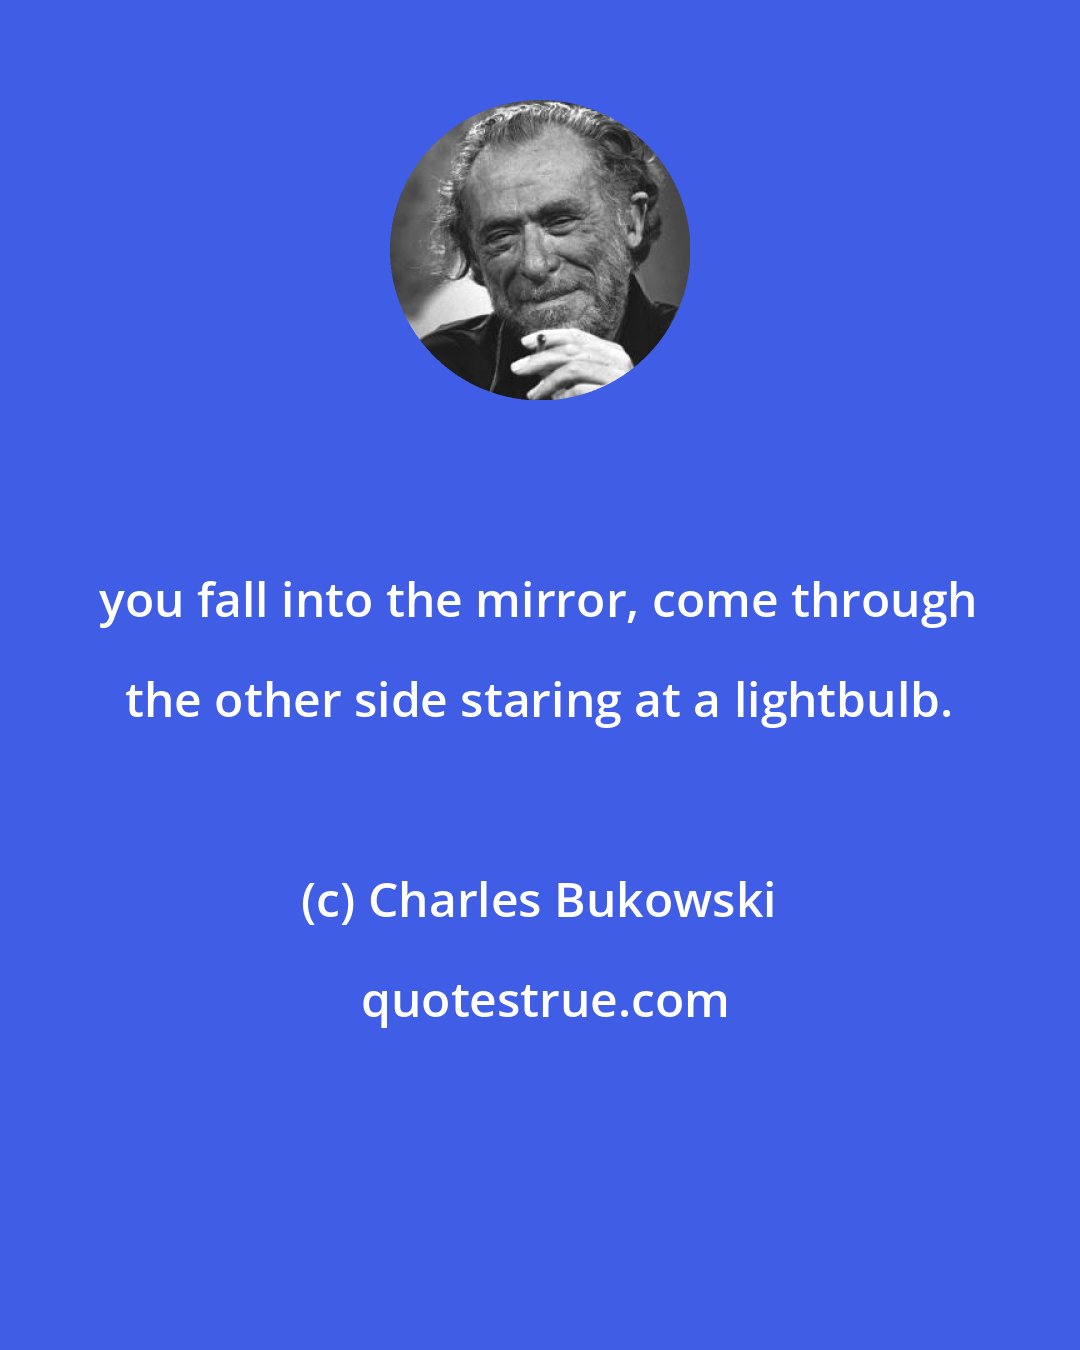 Charles Bukowski: you fall into the mirror, come through the other side staring at a lightbulb.